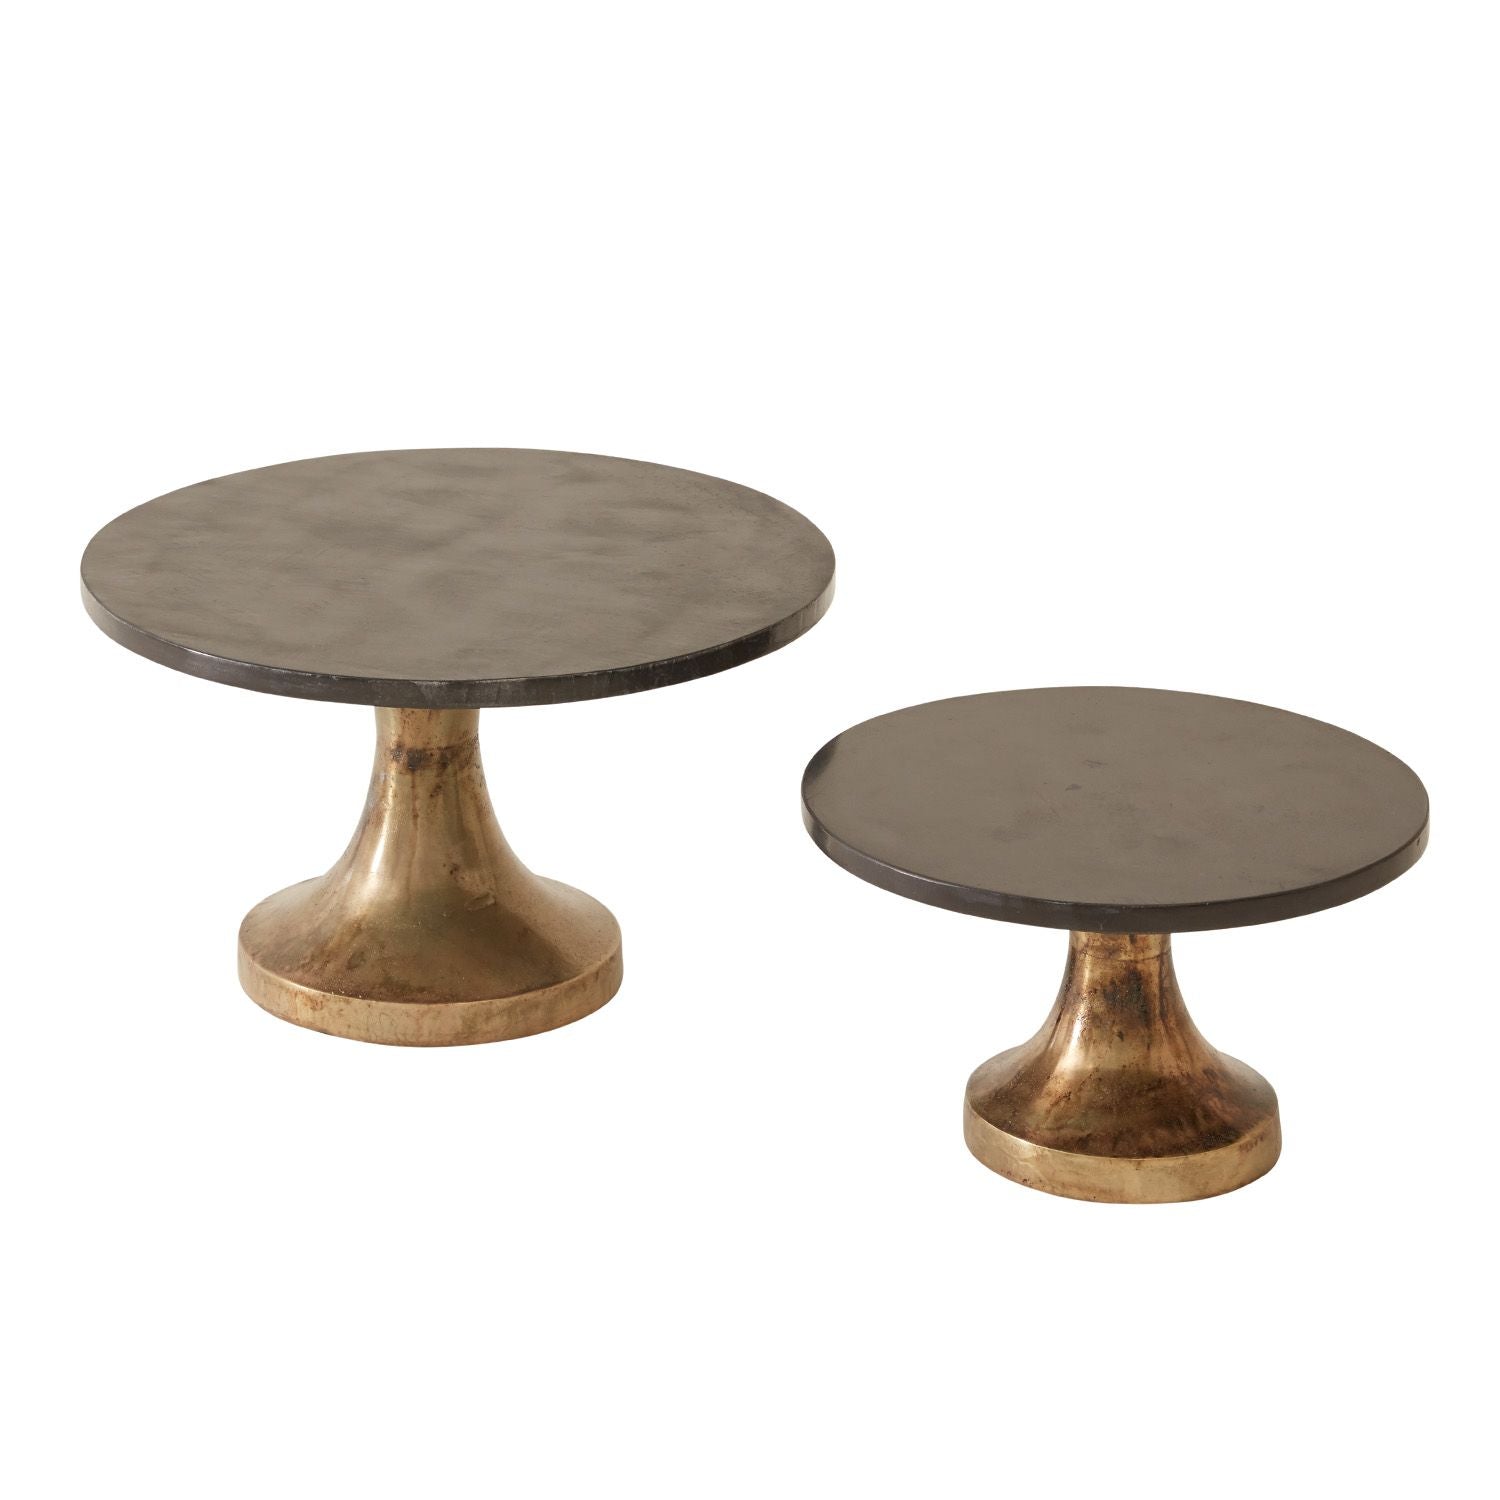 The Finale Cake Stand by Accent Decor | Luxury Serveware | Willow & Albert Home